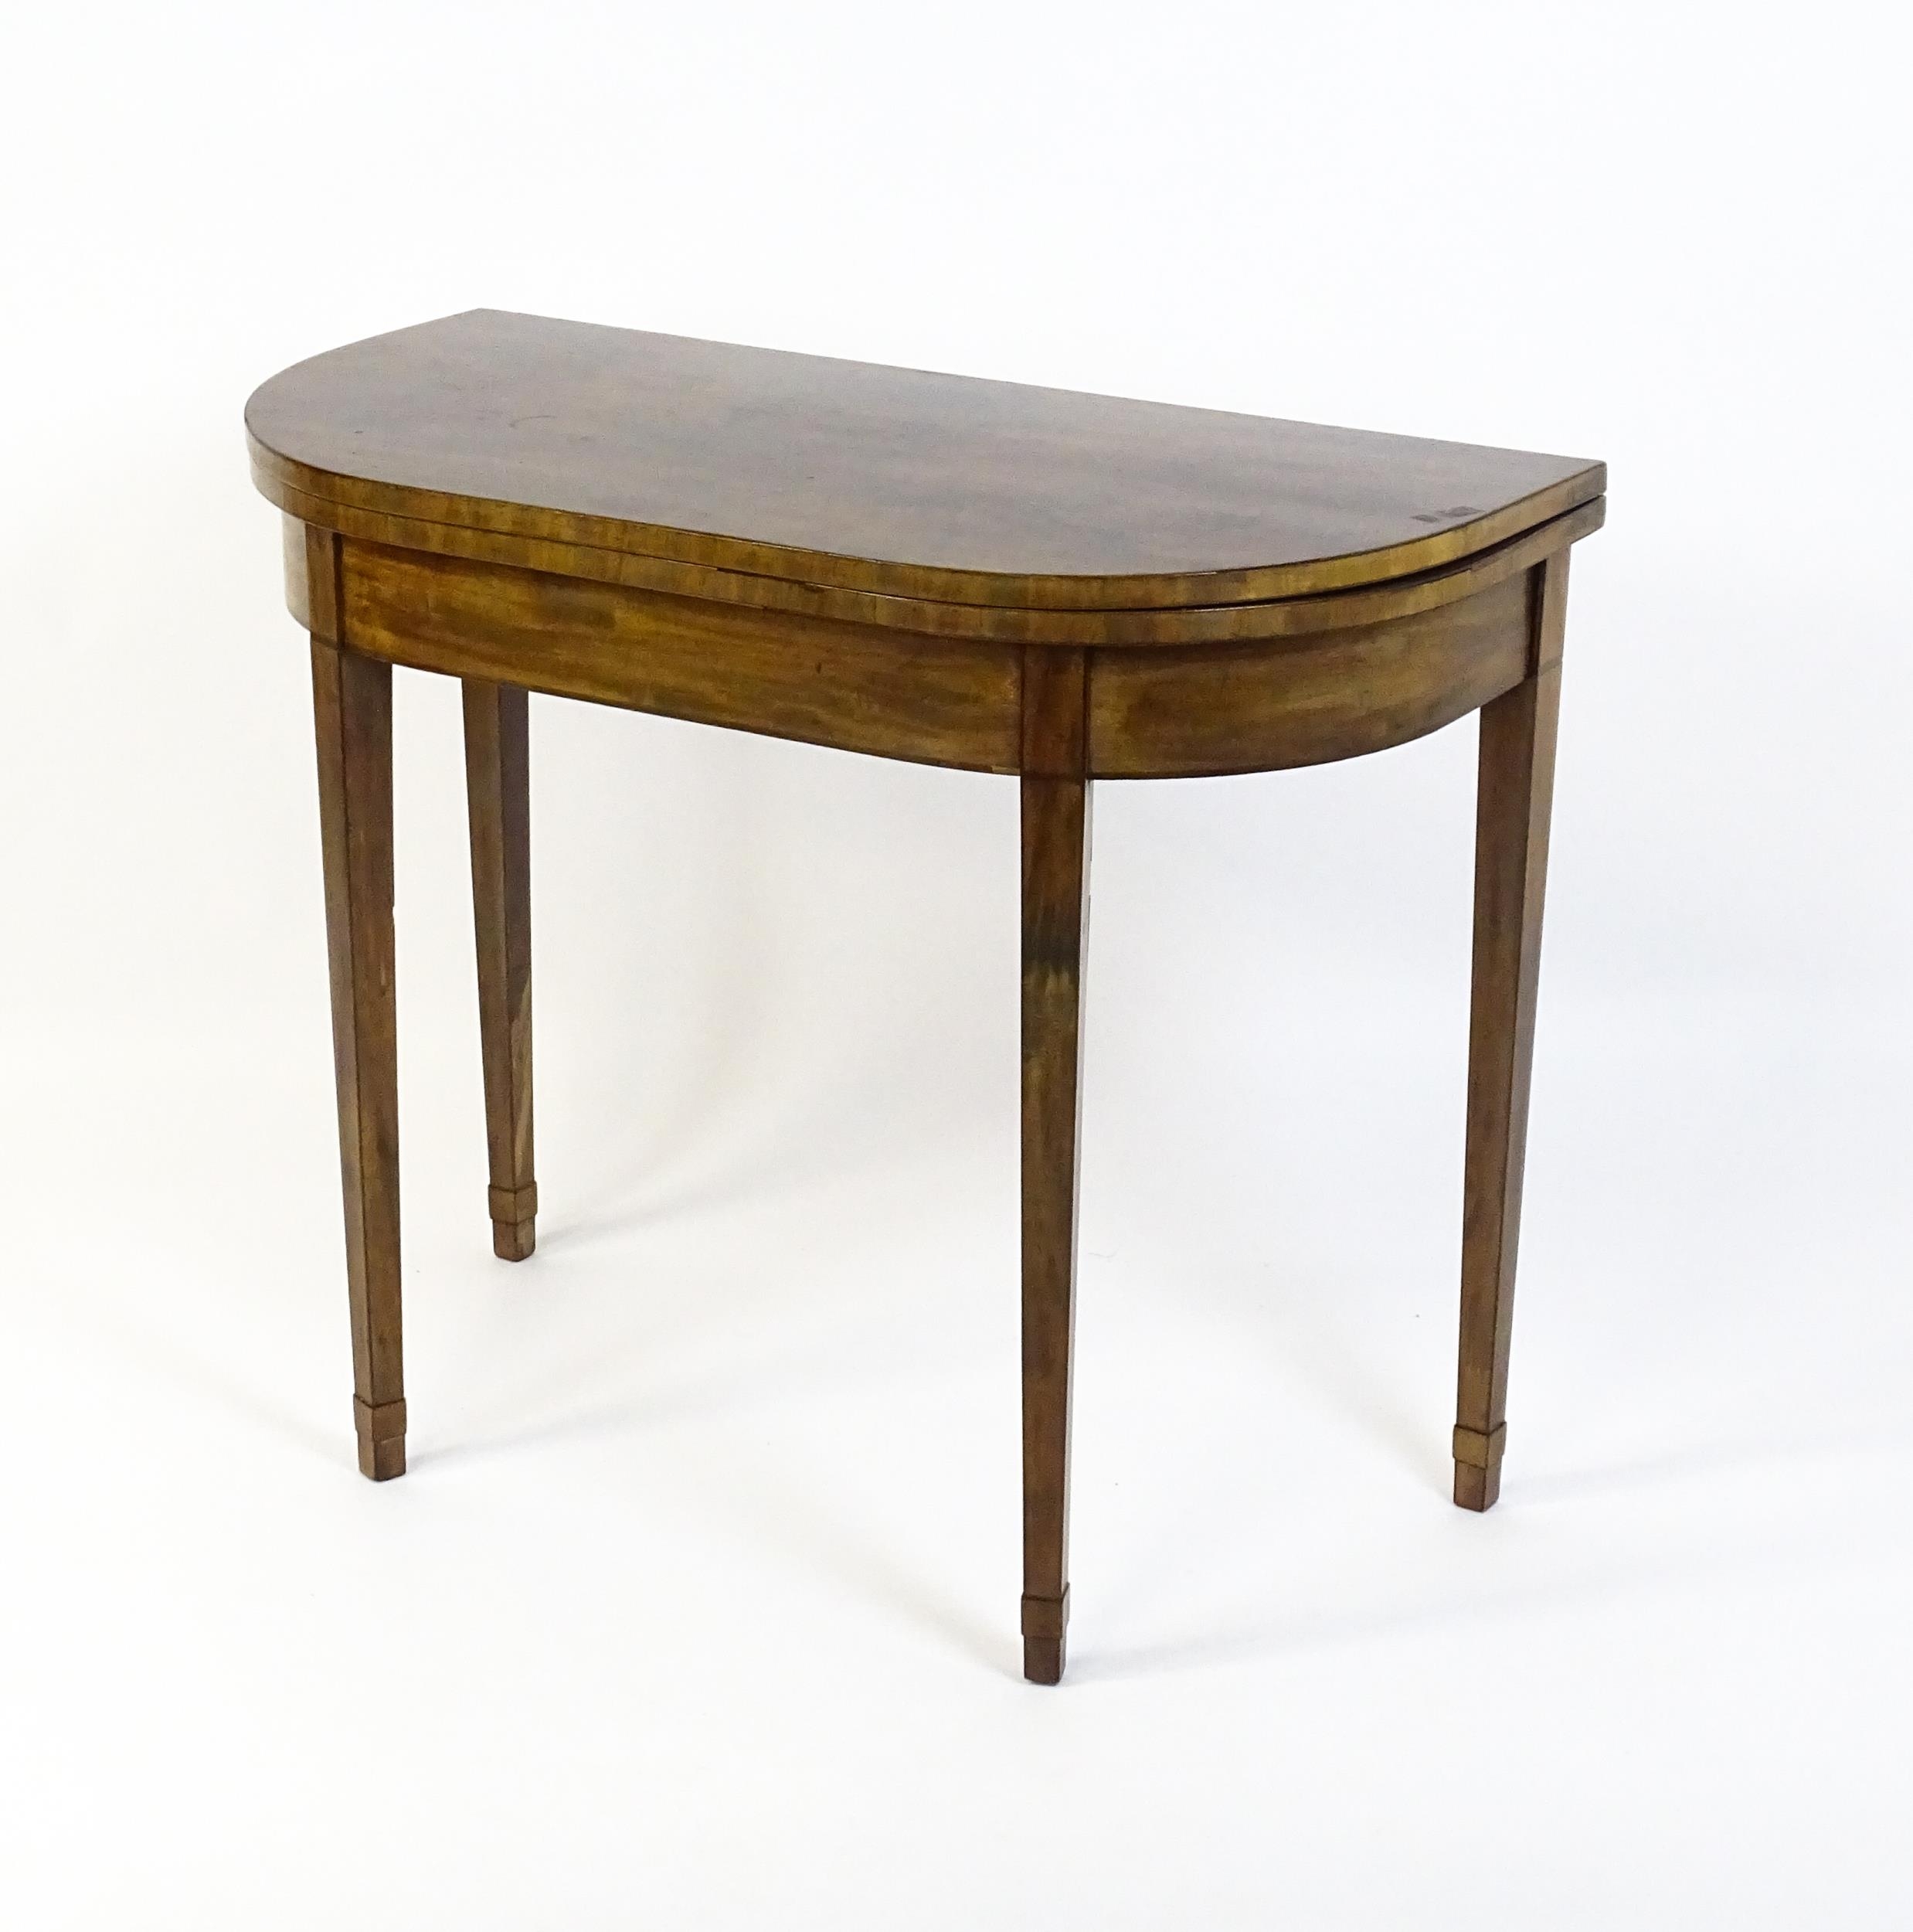 An early 19thC mahogany card table of demi lune form, the top opening to show a baize circular